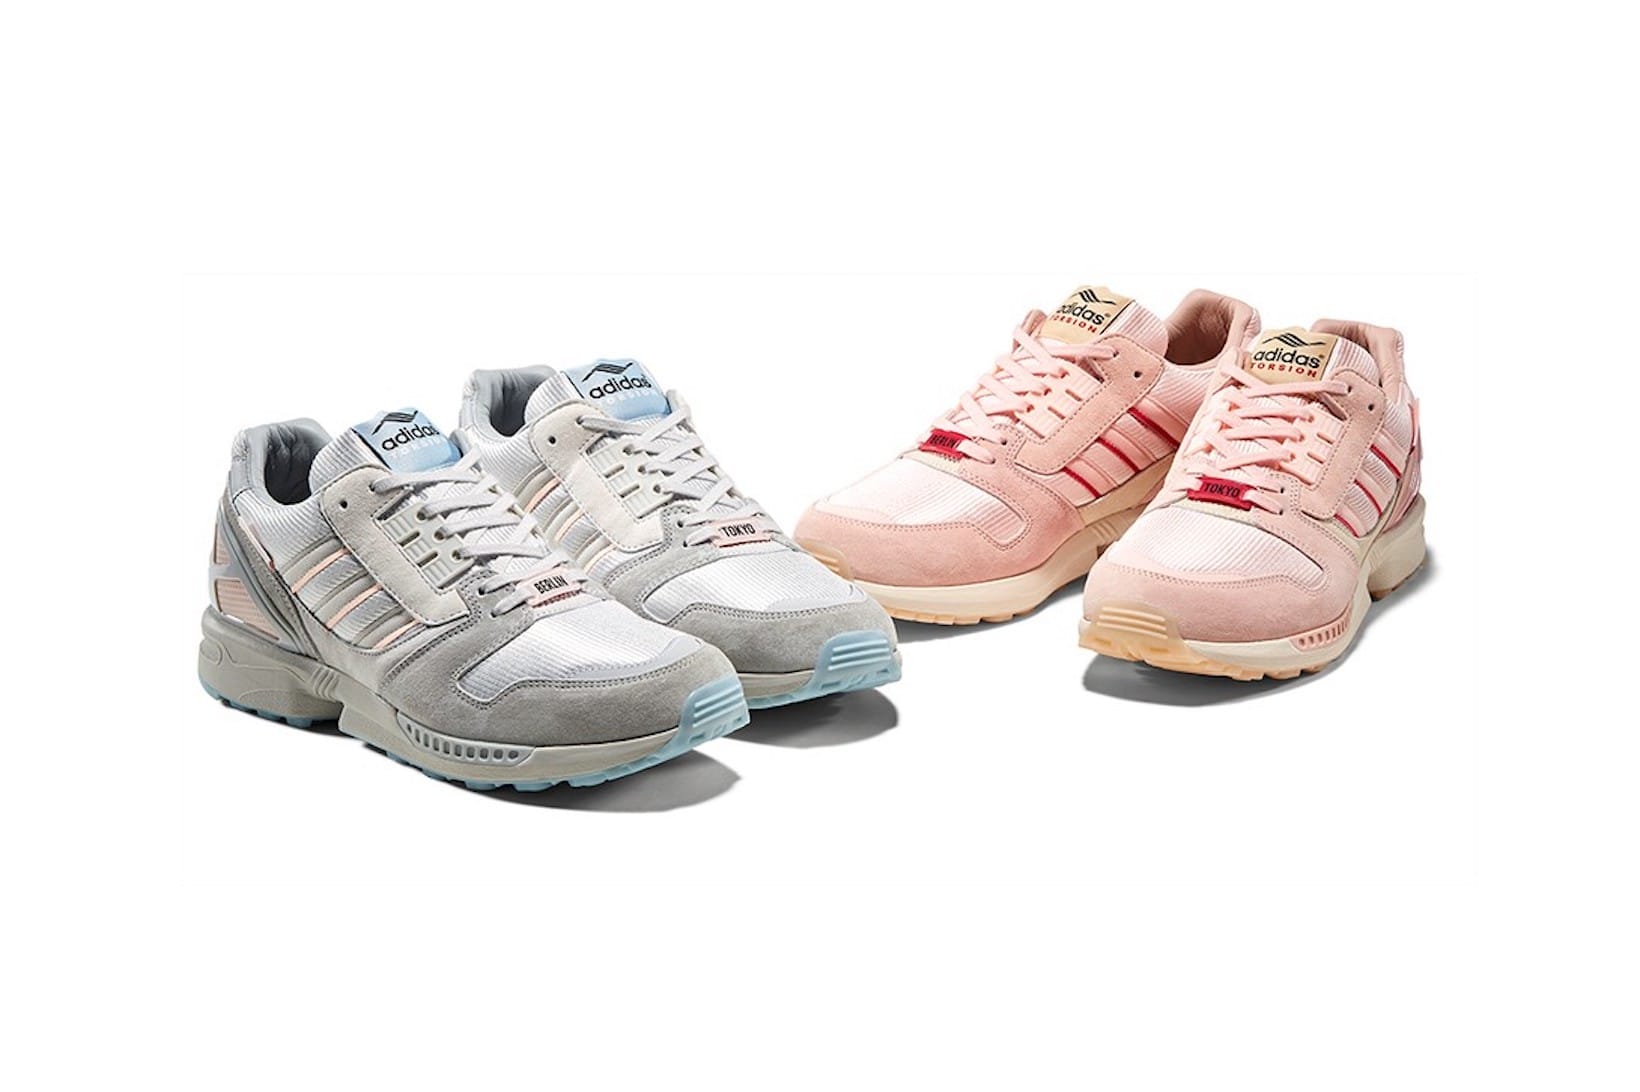 adidas zx 8000 sneakers